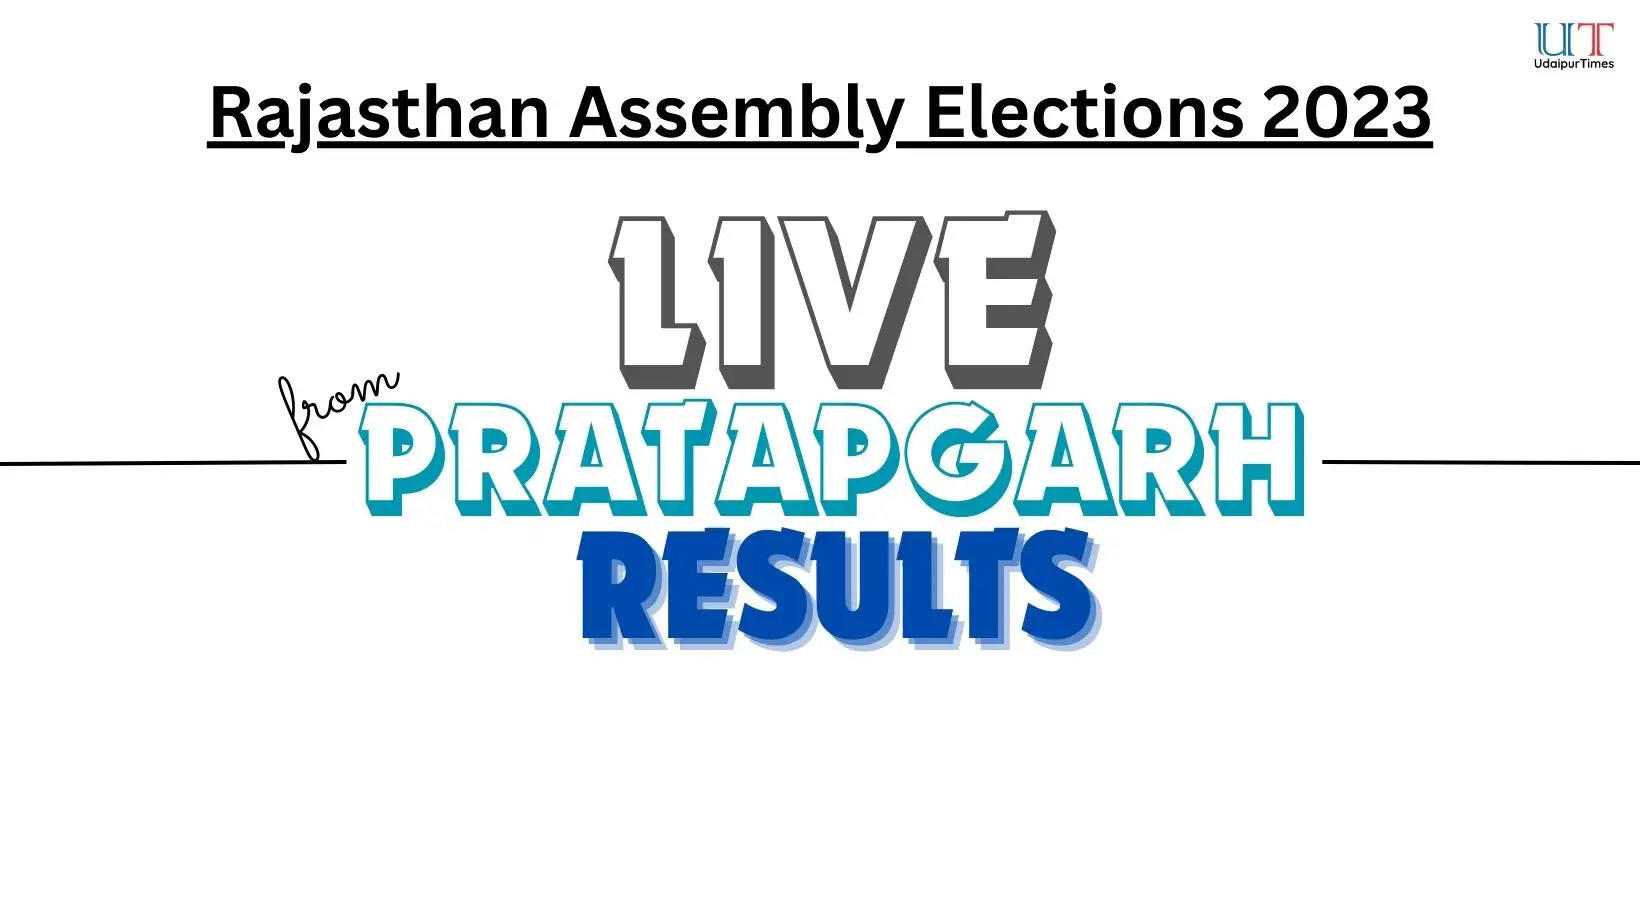 LIVE Election Results from Pratapgarh